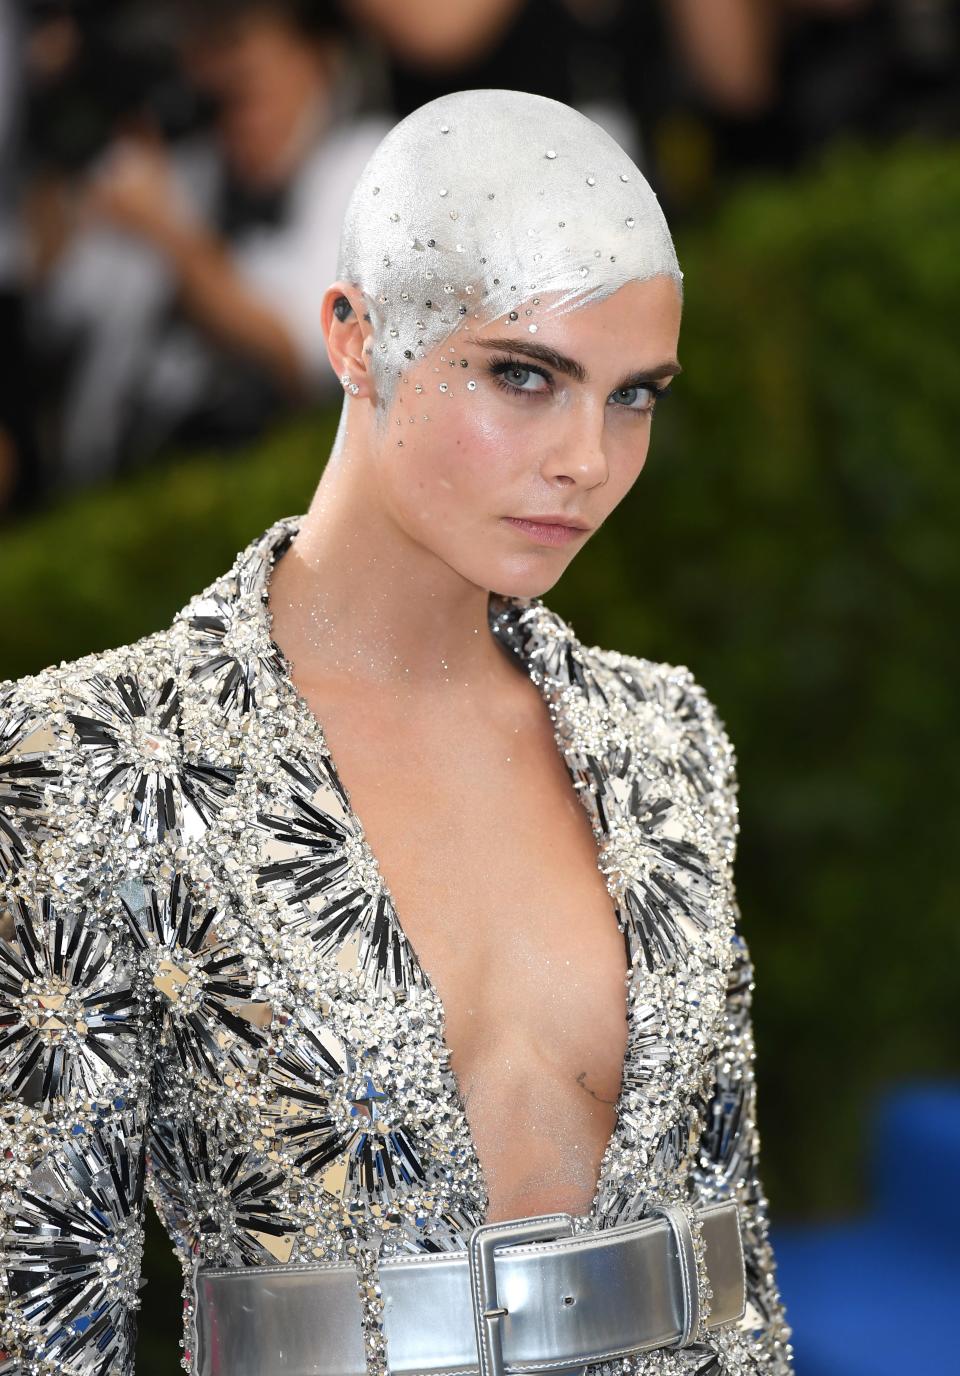 <p>Ah, memories. <a rel="nofollow noopener" href="https://www.glamour.com/story/cara-delevingne-met-gala-2017-bald-silver-head?mbid=synd_yahoobeauty" target="_blank" data-ylk="slk:This silver-painted look" class="link ">This silver-painted look</a> was the moment that told us Cara's wasn't going to be any old grow-out. She looks incredible, thanks to Roszak's silver paint pixie cut, complete with forehead wisps and a scattering of crystals. Part <em>Danny Phantom</em> and part alien chic, it's unlike anything a celebrity's done before.</p>